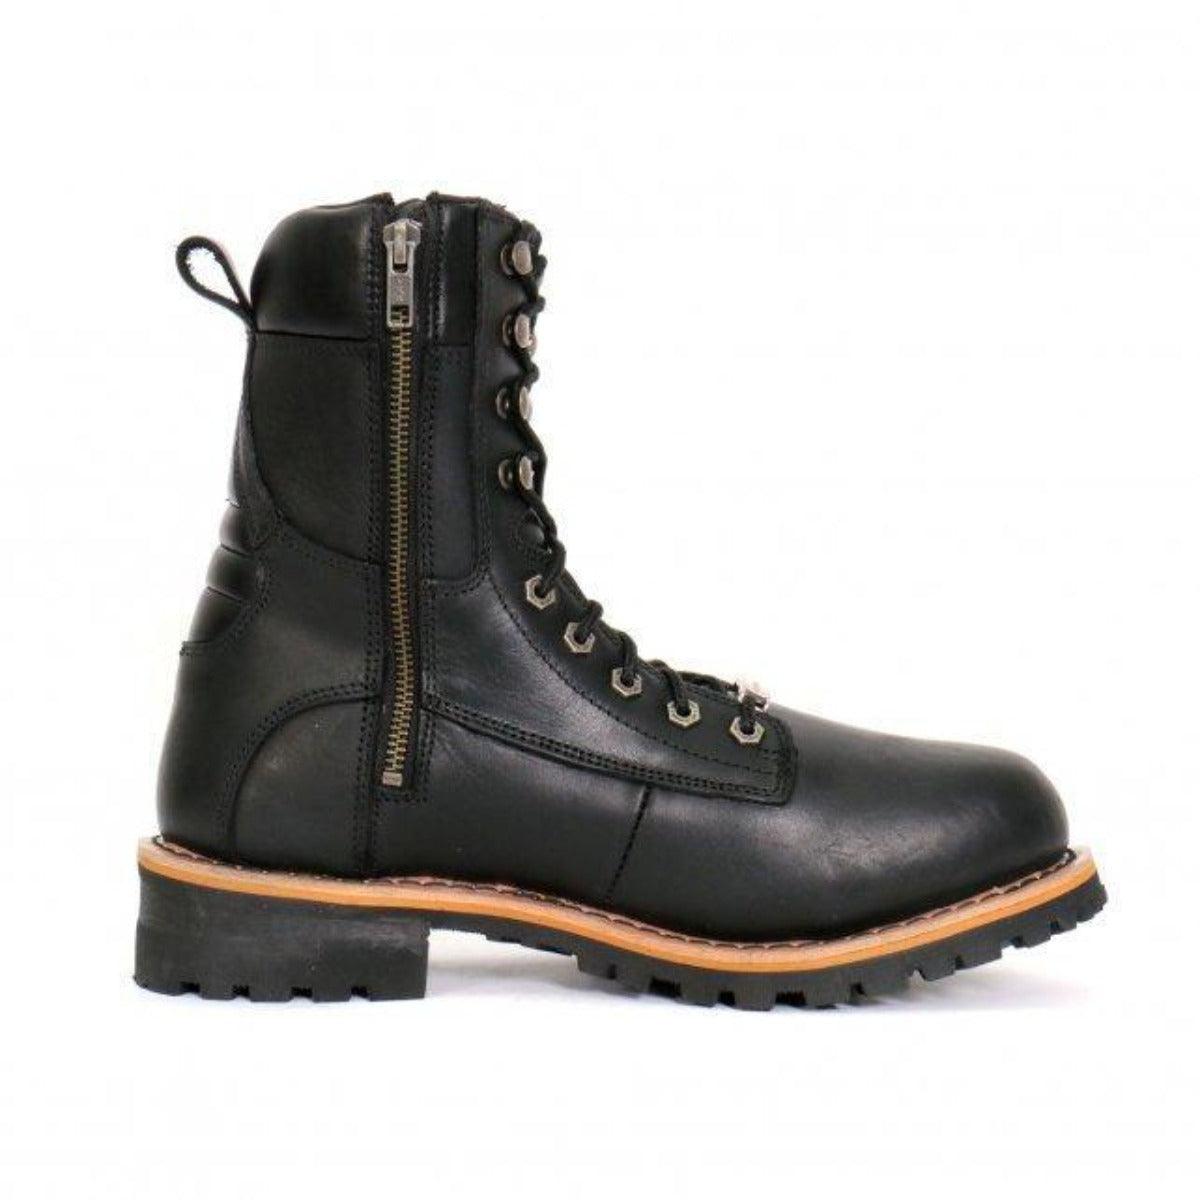 Hot Leathers Men's 8" Two-Tone Logger Boots - American Legend Rider